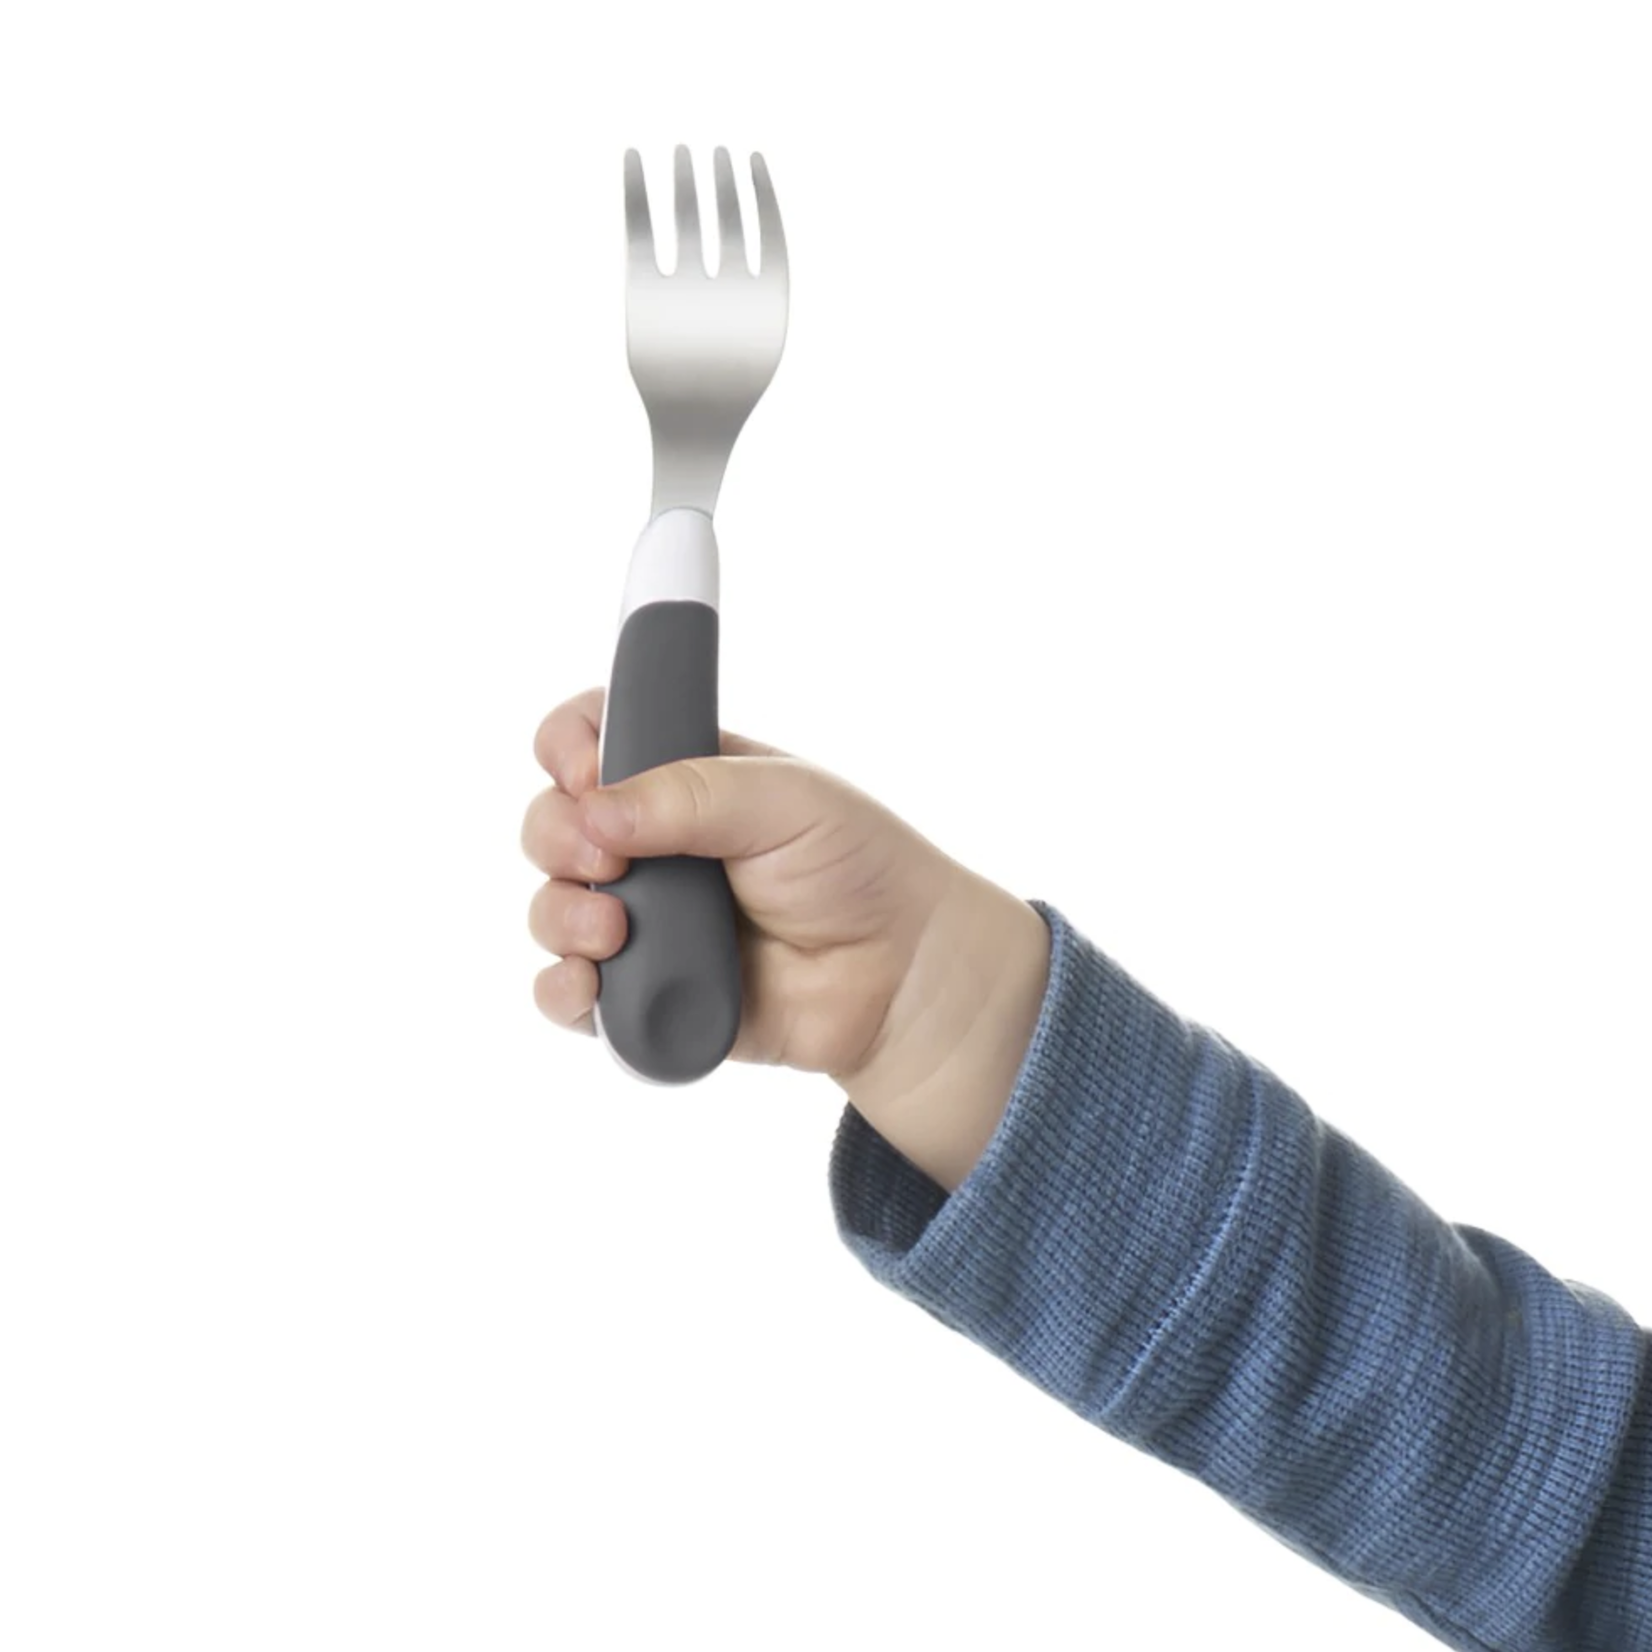 OXO Tot On the Go Fork And Spoon Set-Grey